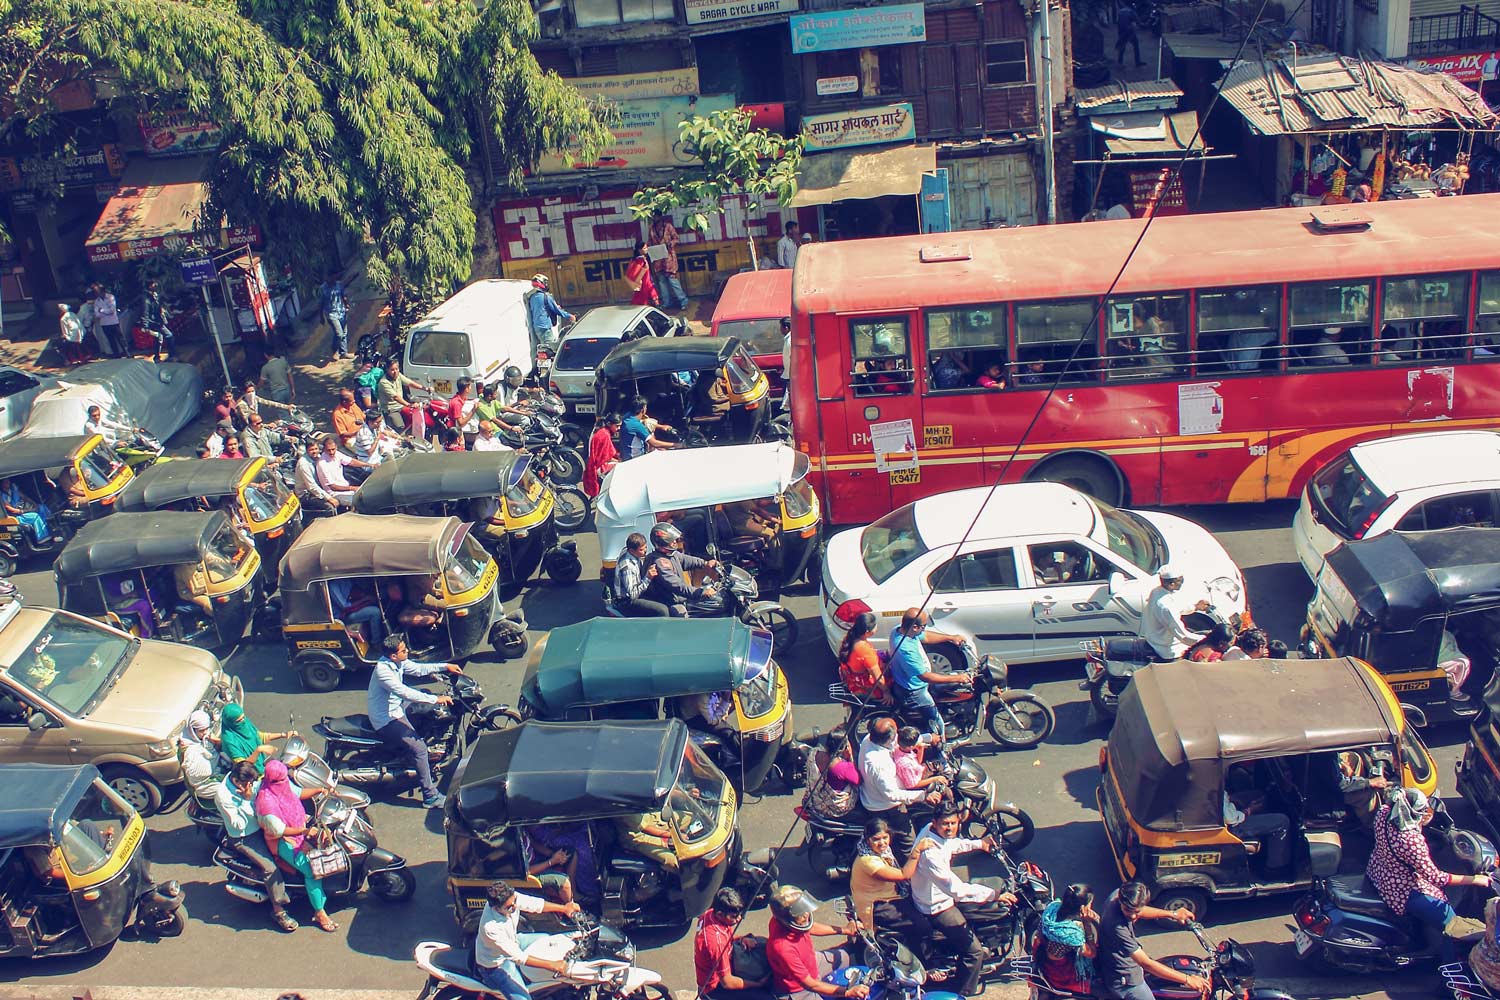 A chaotic road in India as seen from the top of a building